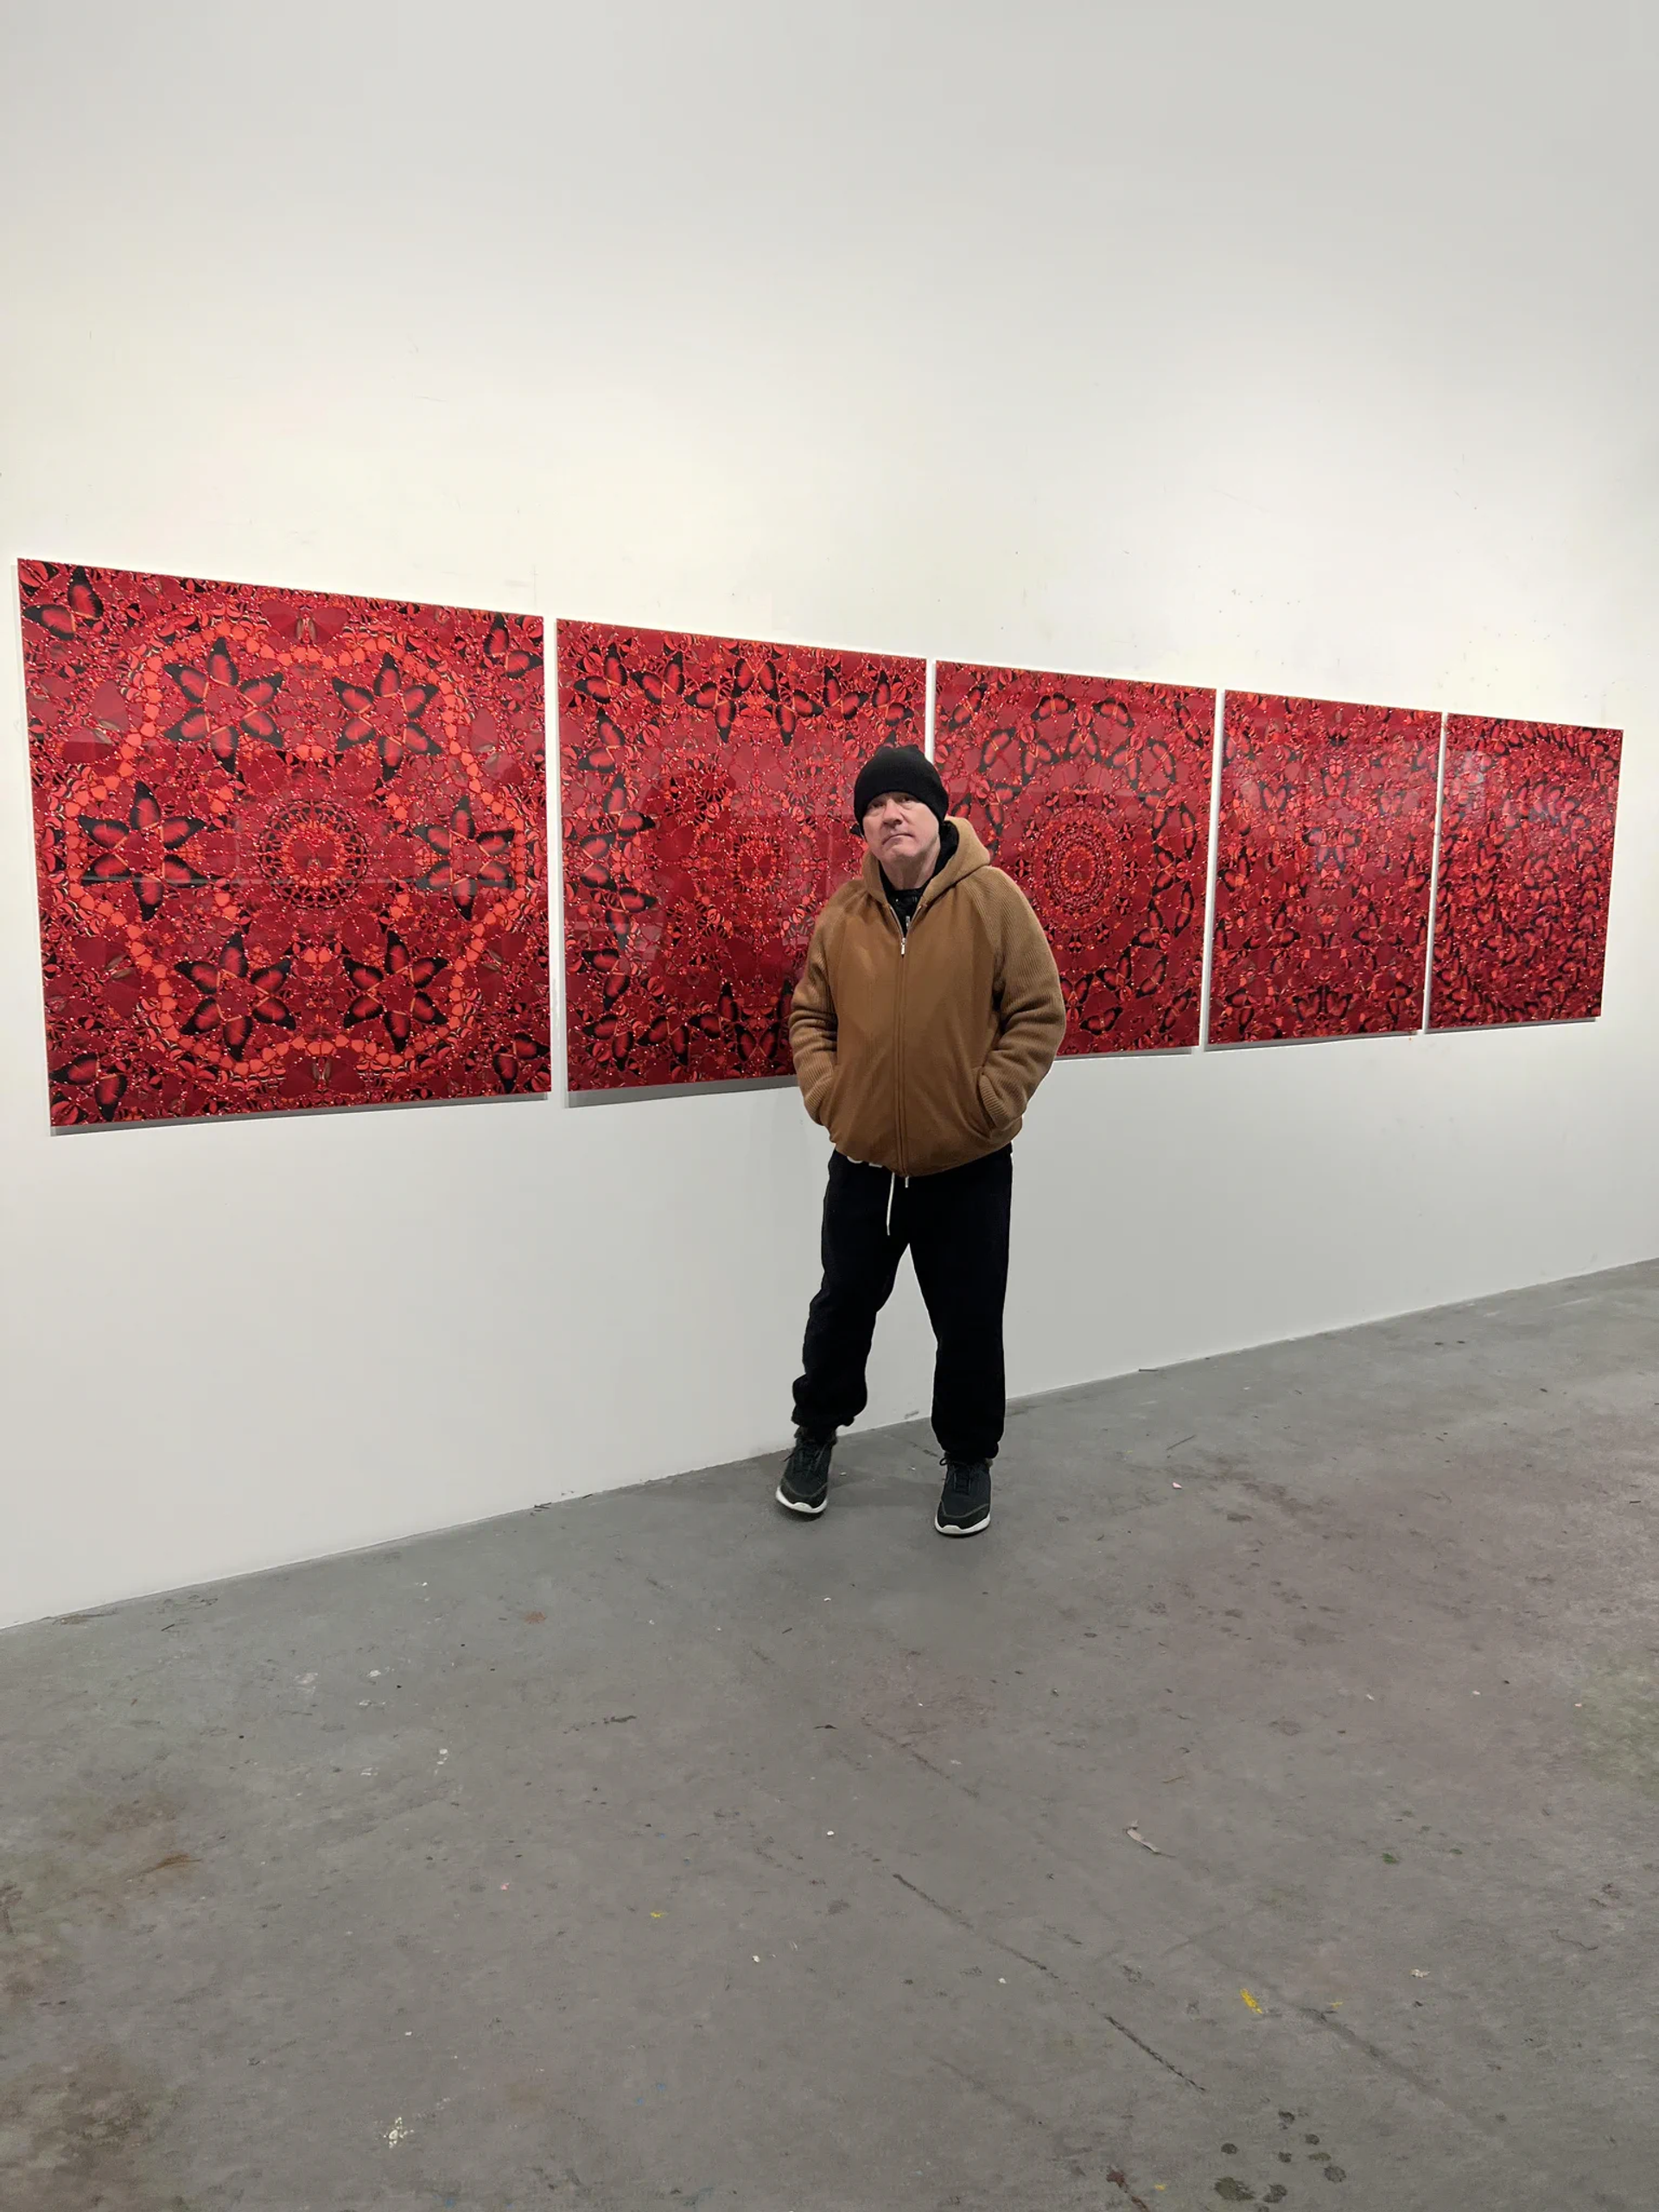 An image of the artist Damien Hirst standing in front of his Empress series. He is shown wearing a beige hoodie and a black beanie and jeans, with his hands in his pockets.